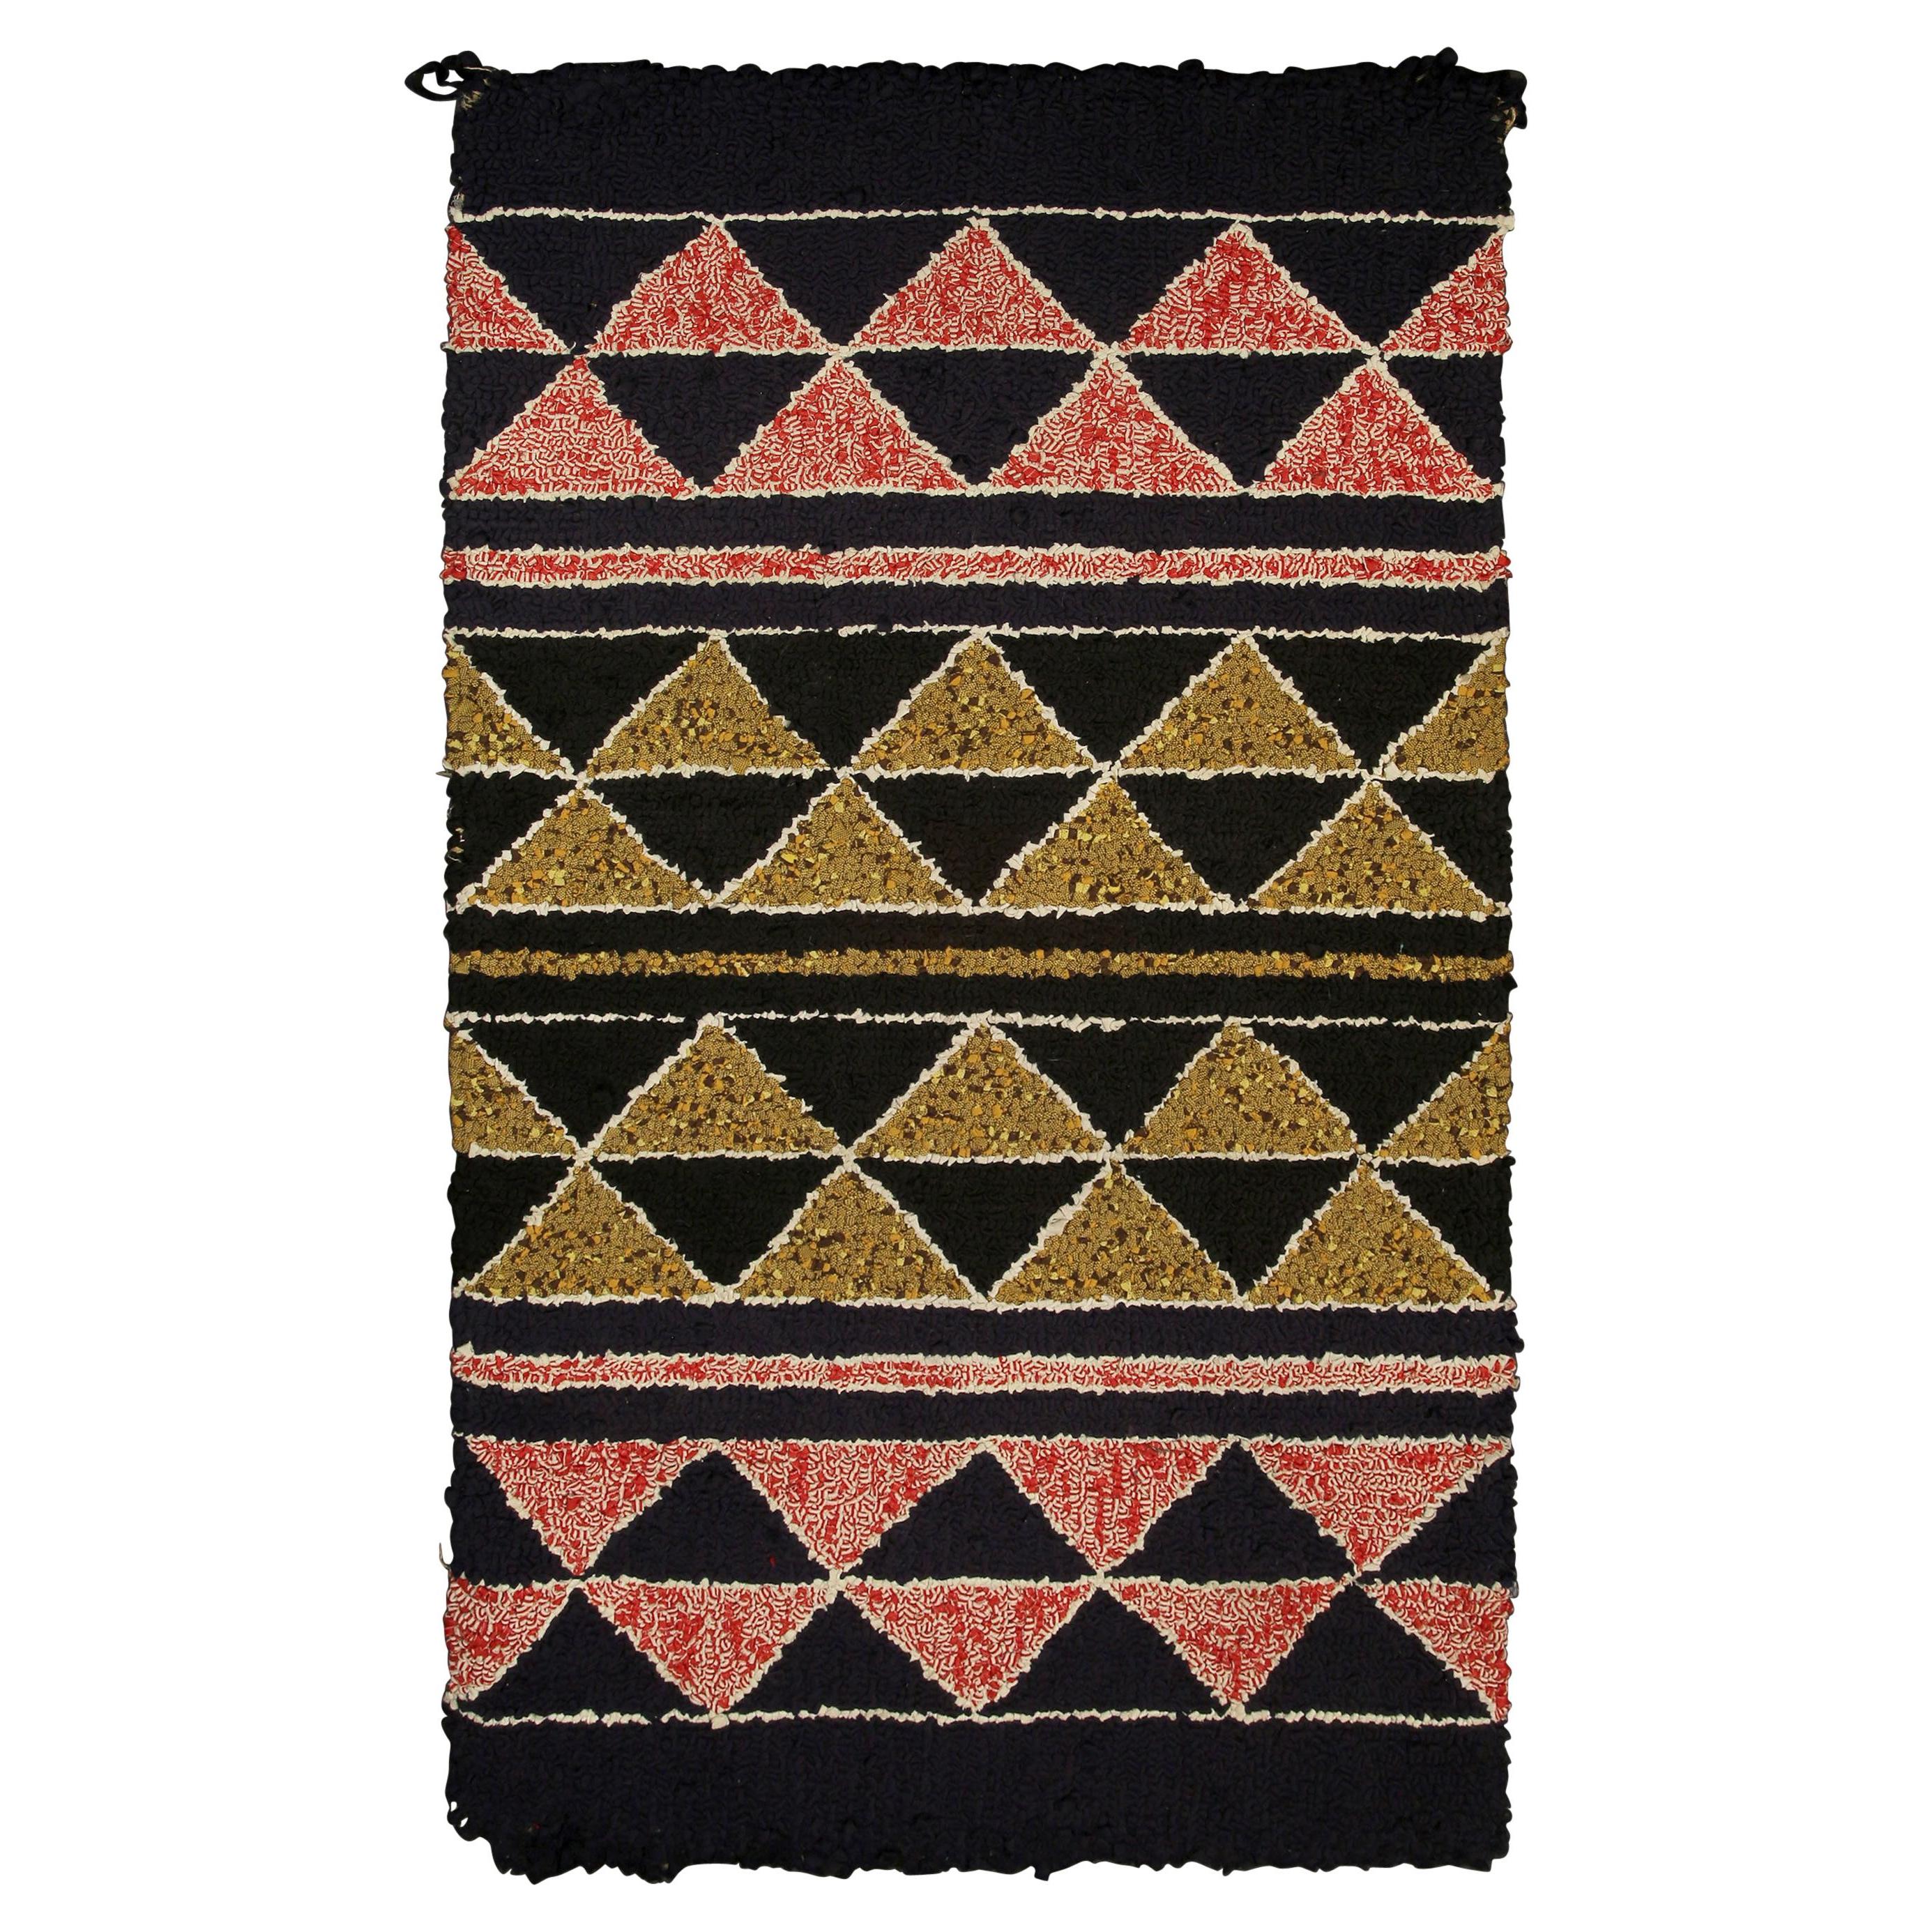 Mid-20th Century American Hooked Rug with Reciprocating Triangle Motif